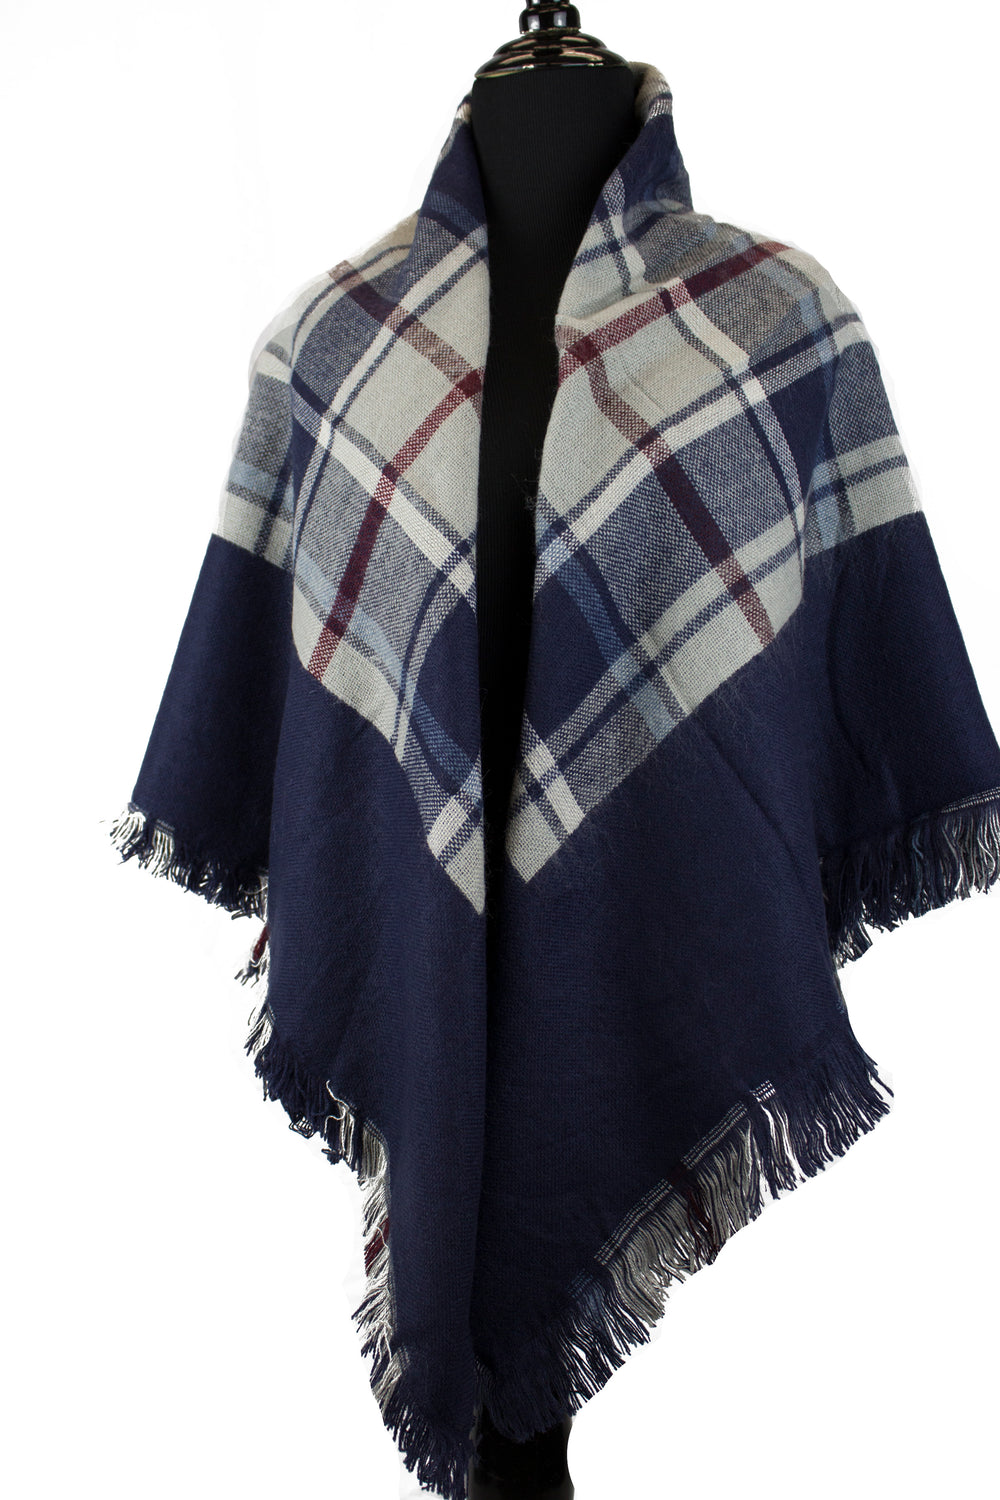 blanket scarf in navy gray and burgundy with stripes